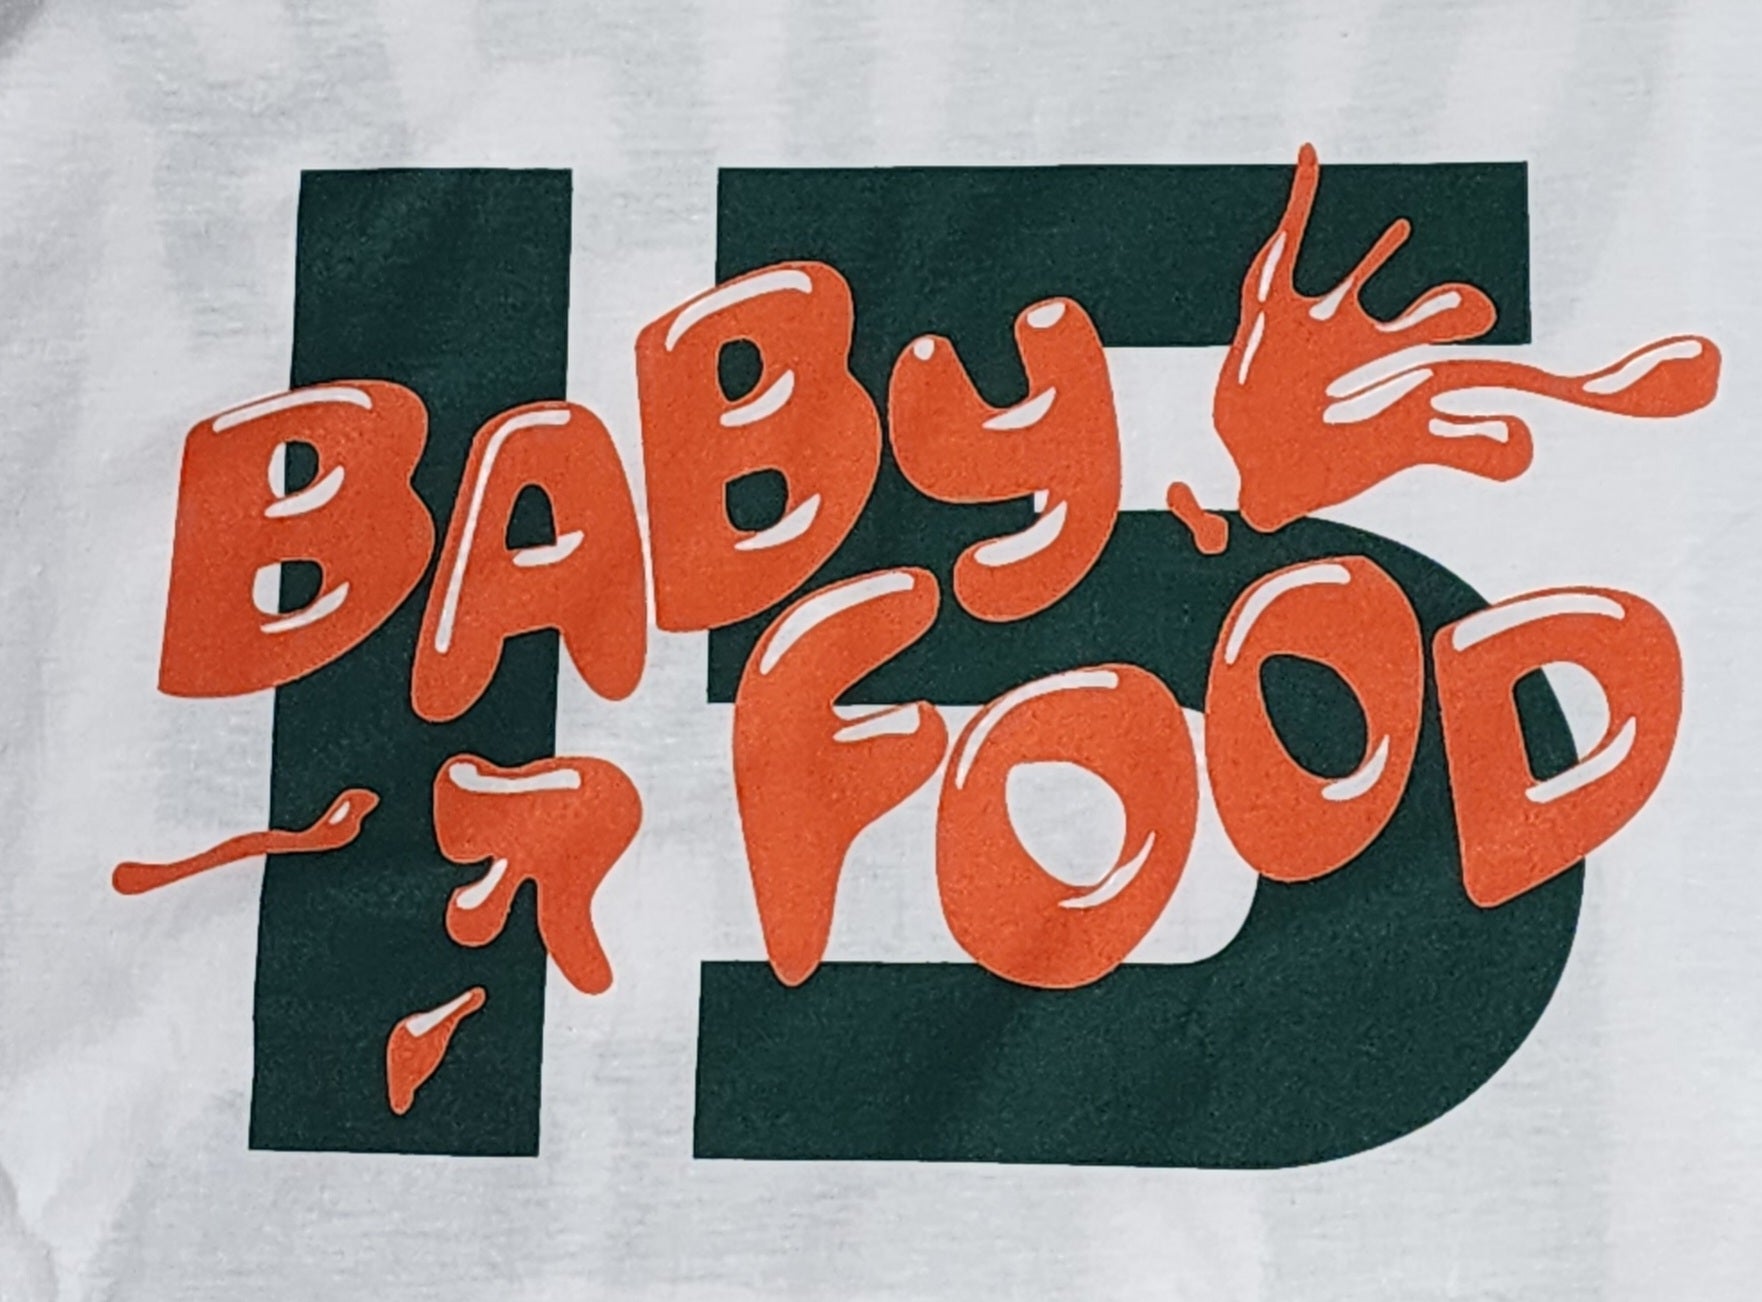 Norchad Omier 'Baby Food' Player T-Shirt - White